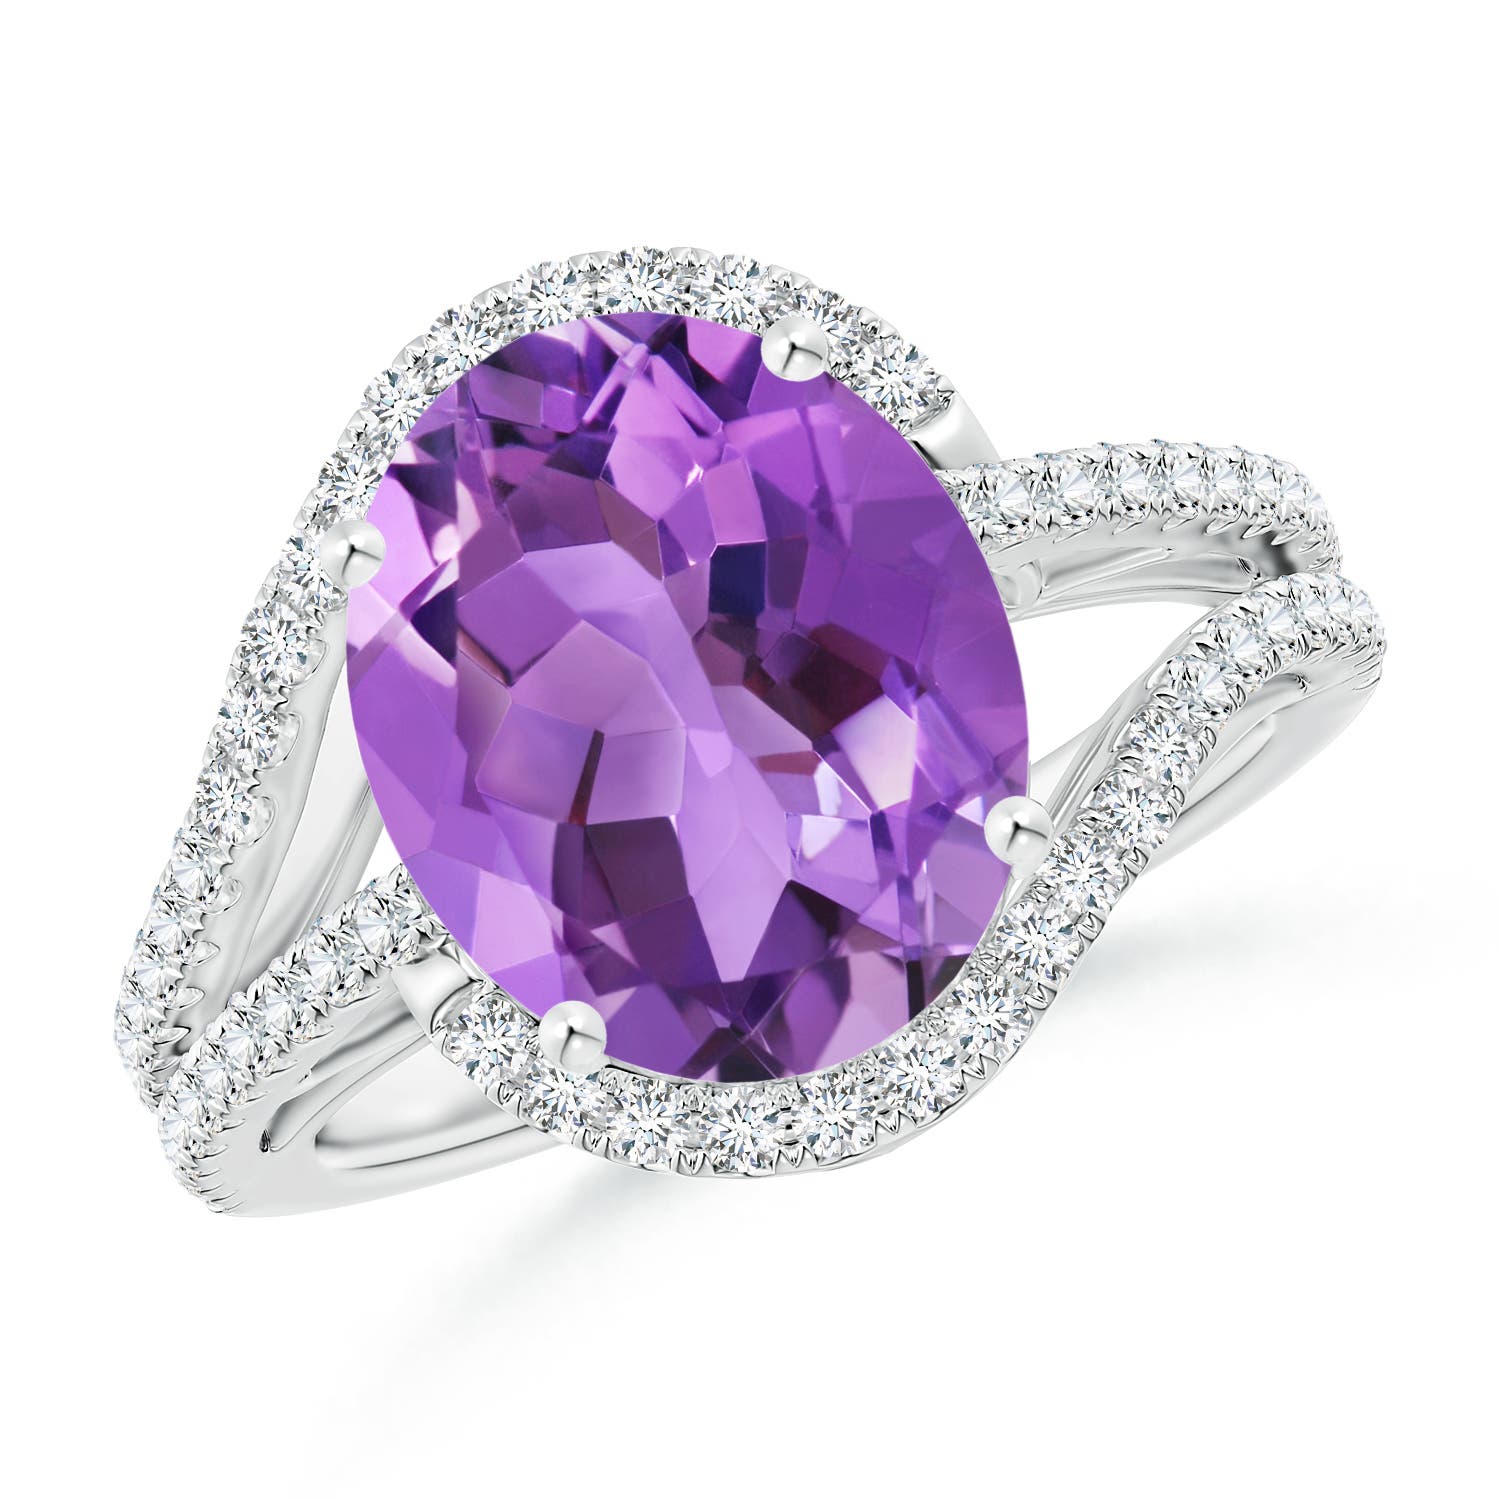 AA - Amethyst / 4.92 CT / 14 KT White Gold